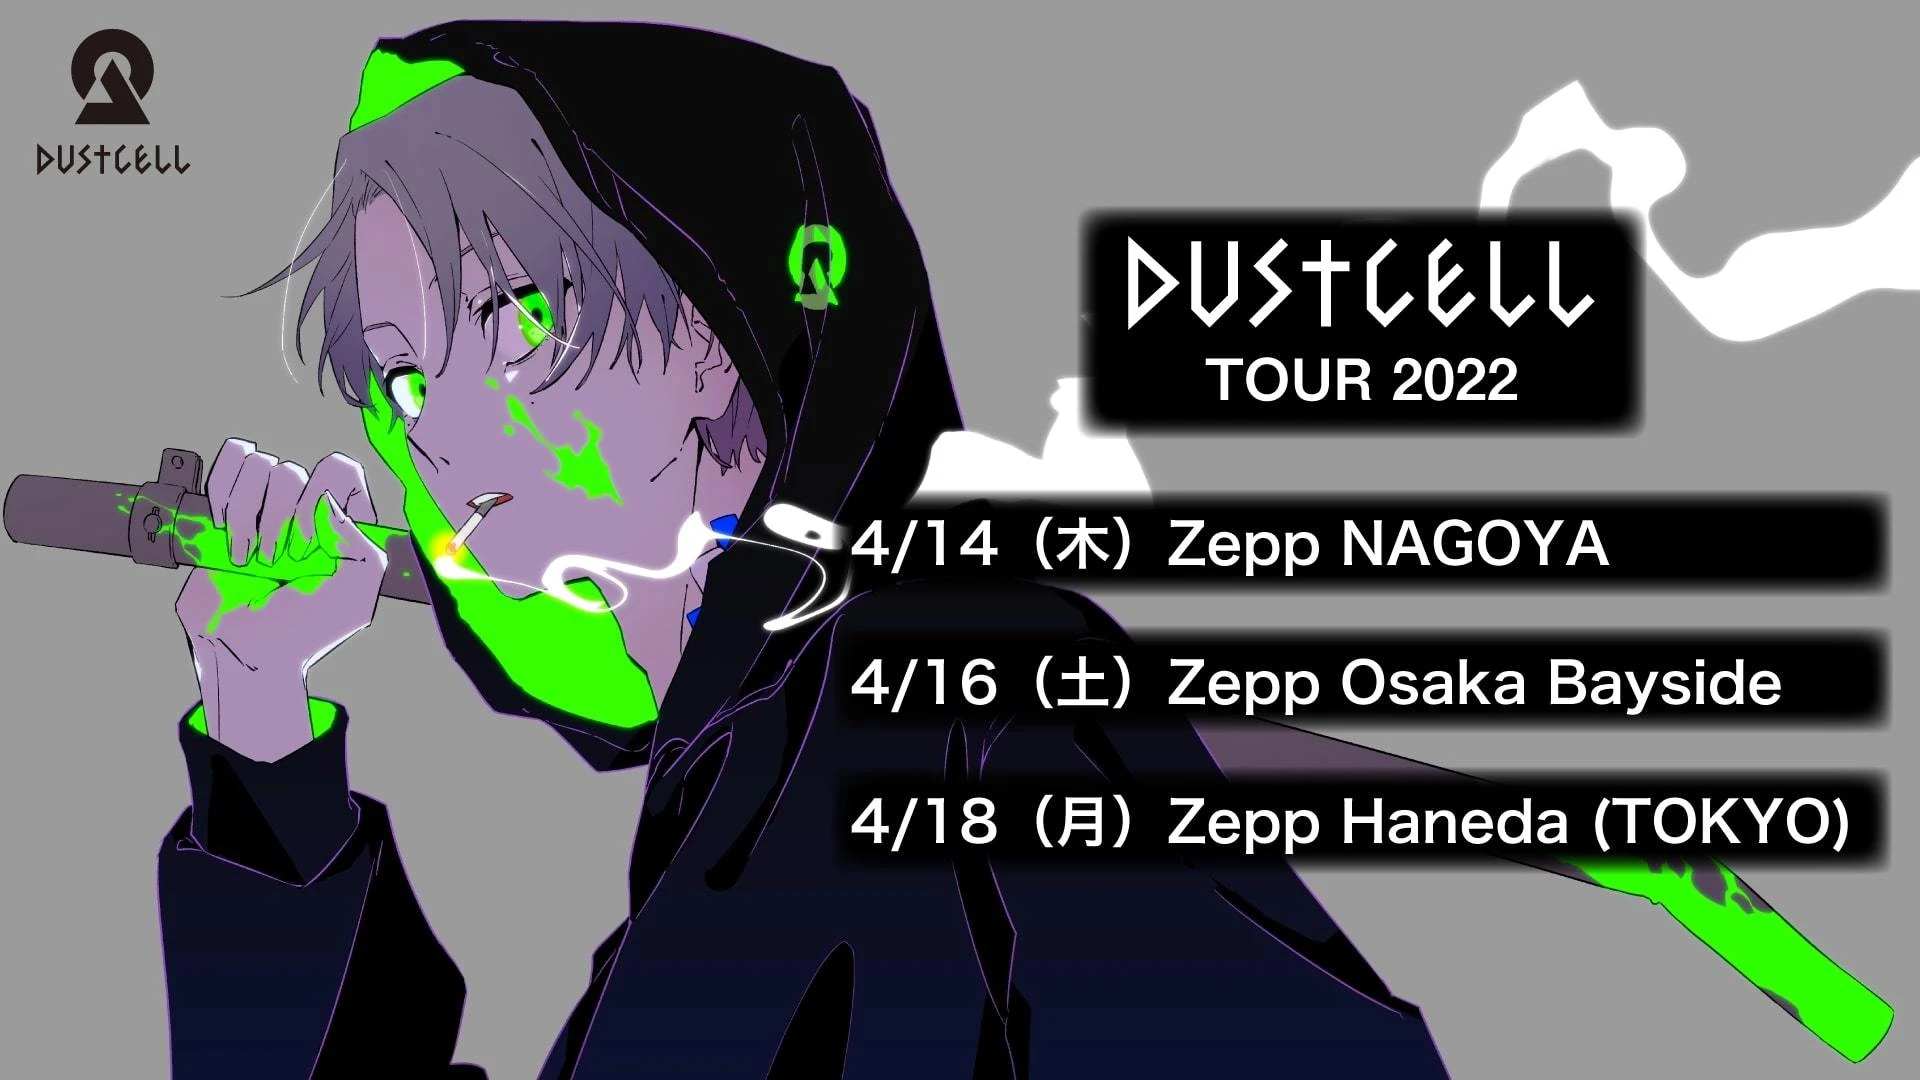 「DUSTCELL TOUR 2022」